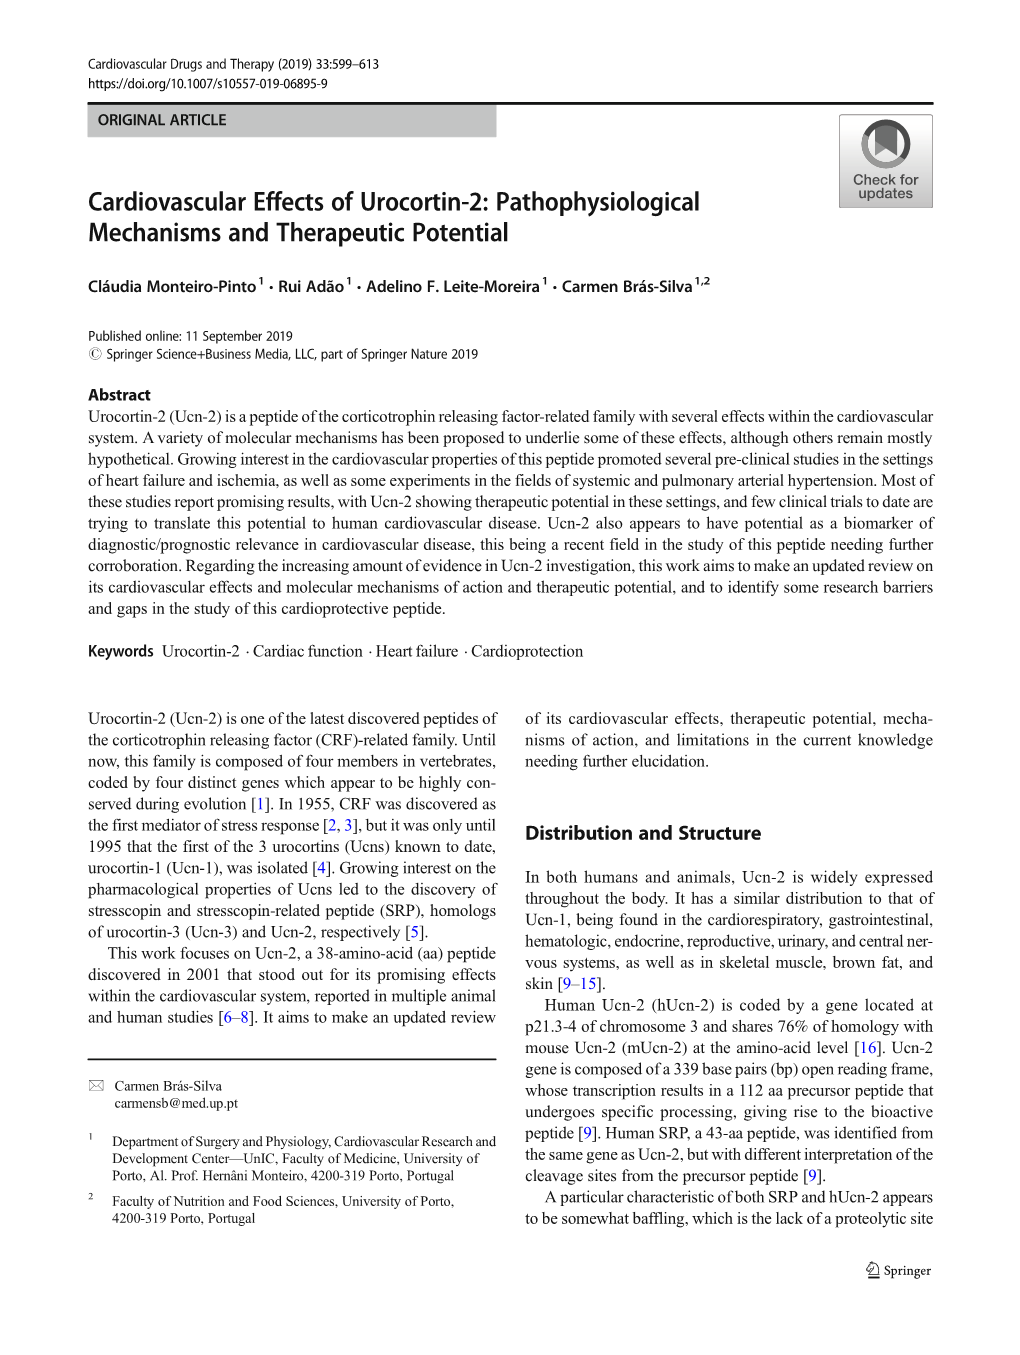 Cardiovascular Effects of Urocortin-2: Pathophysiological Mechanisms and Therapeutic Potential